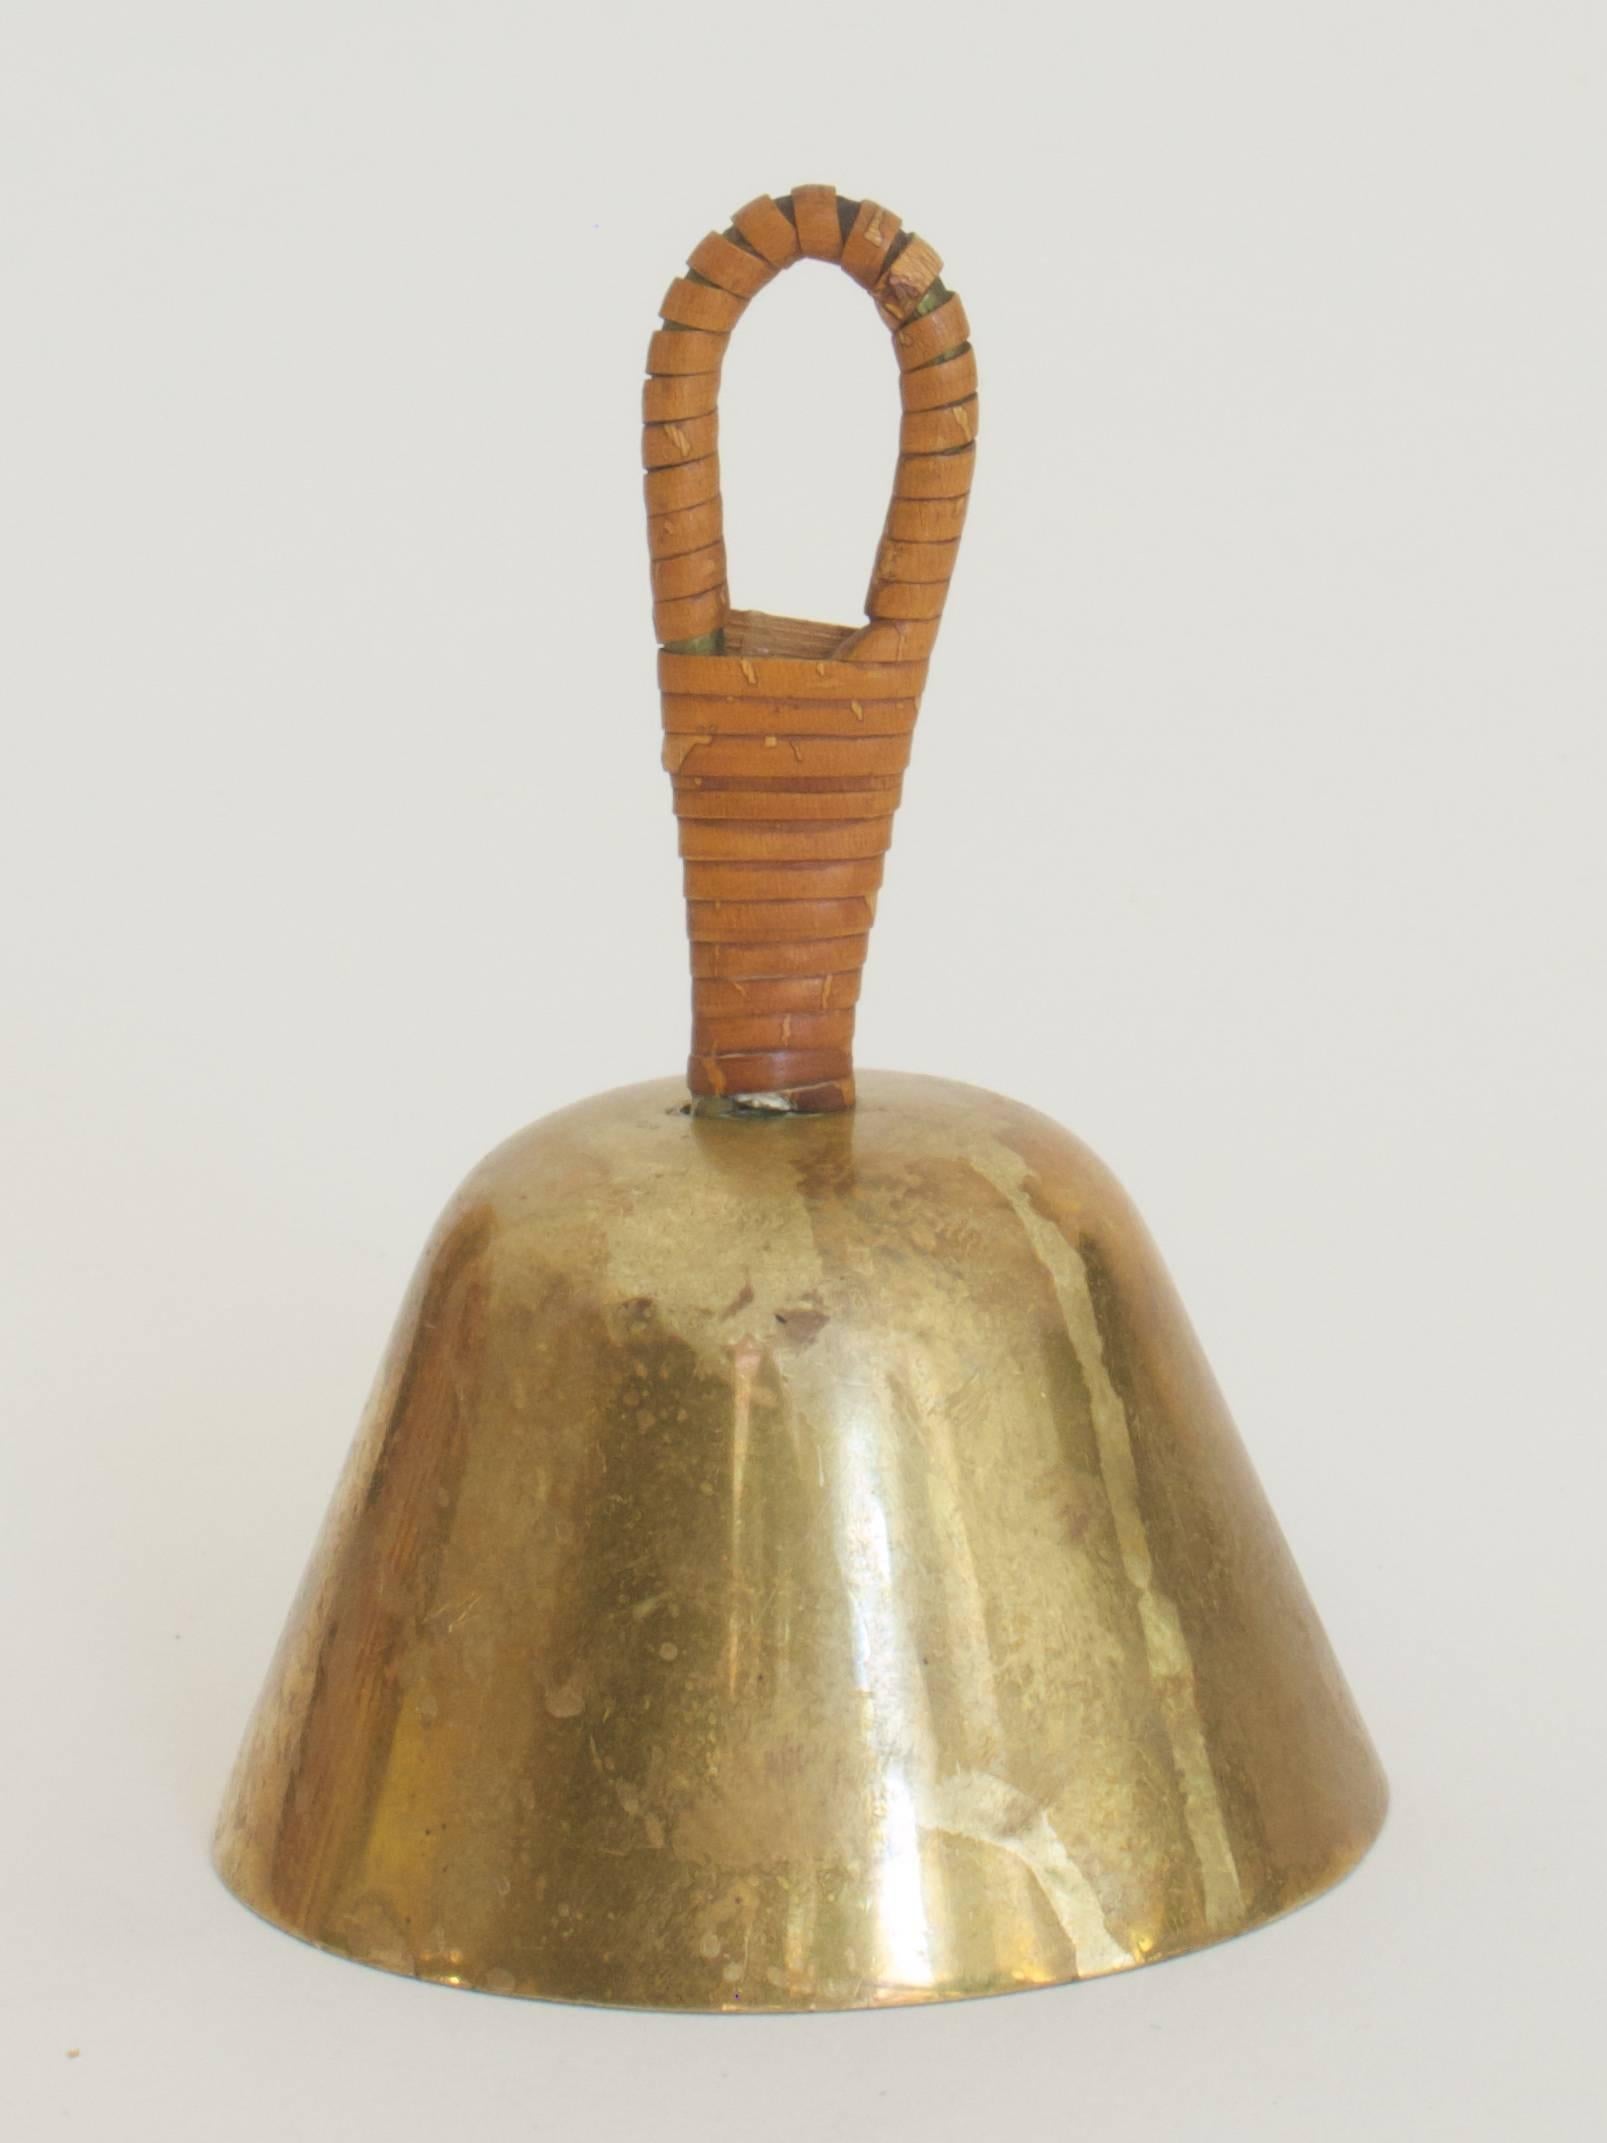 Bell by Carl Auböck
polished brass, inside patinated
handle coiled up with wicker.